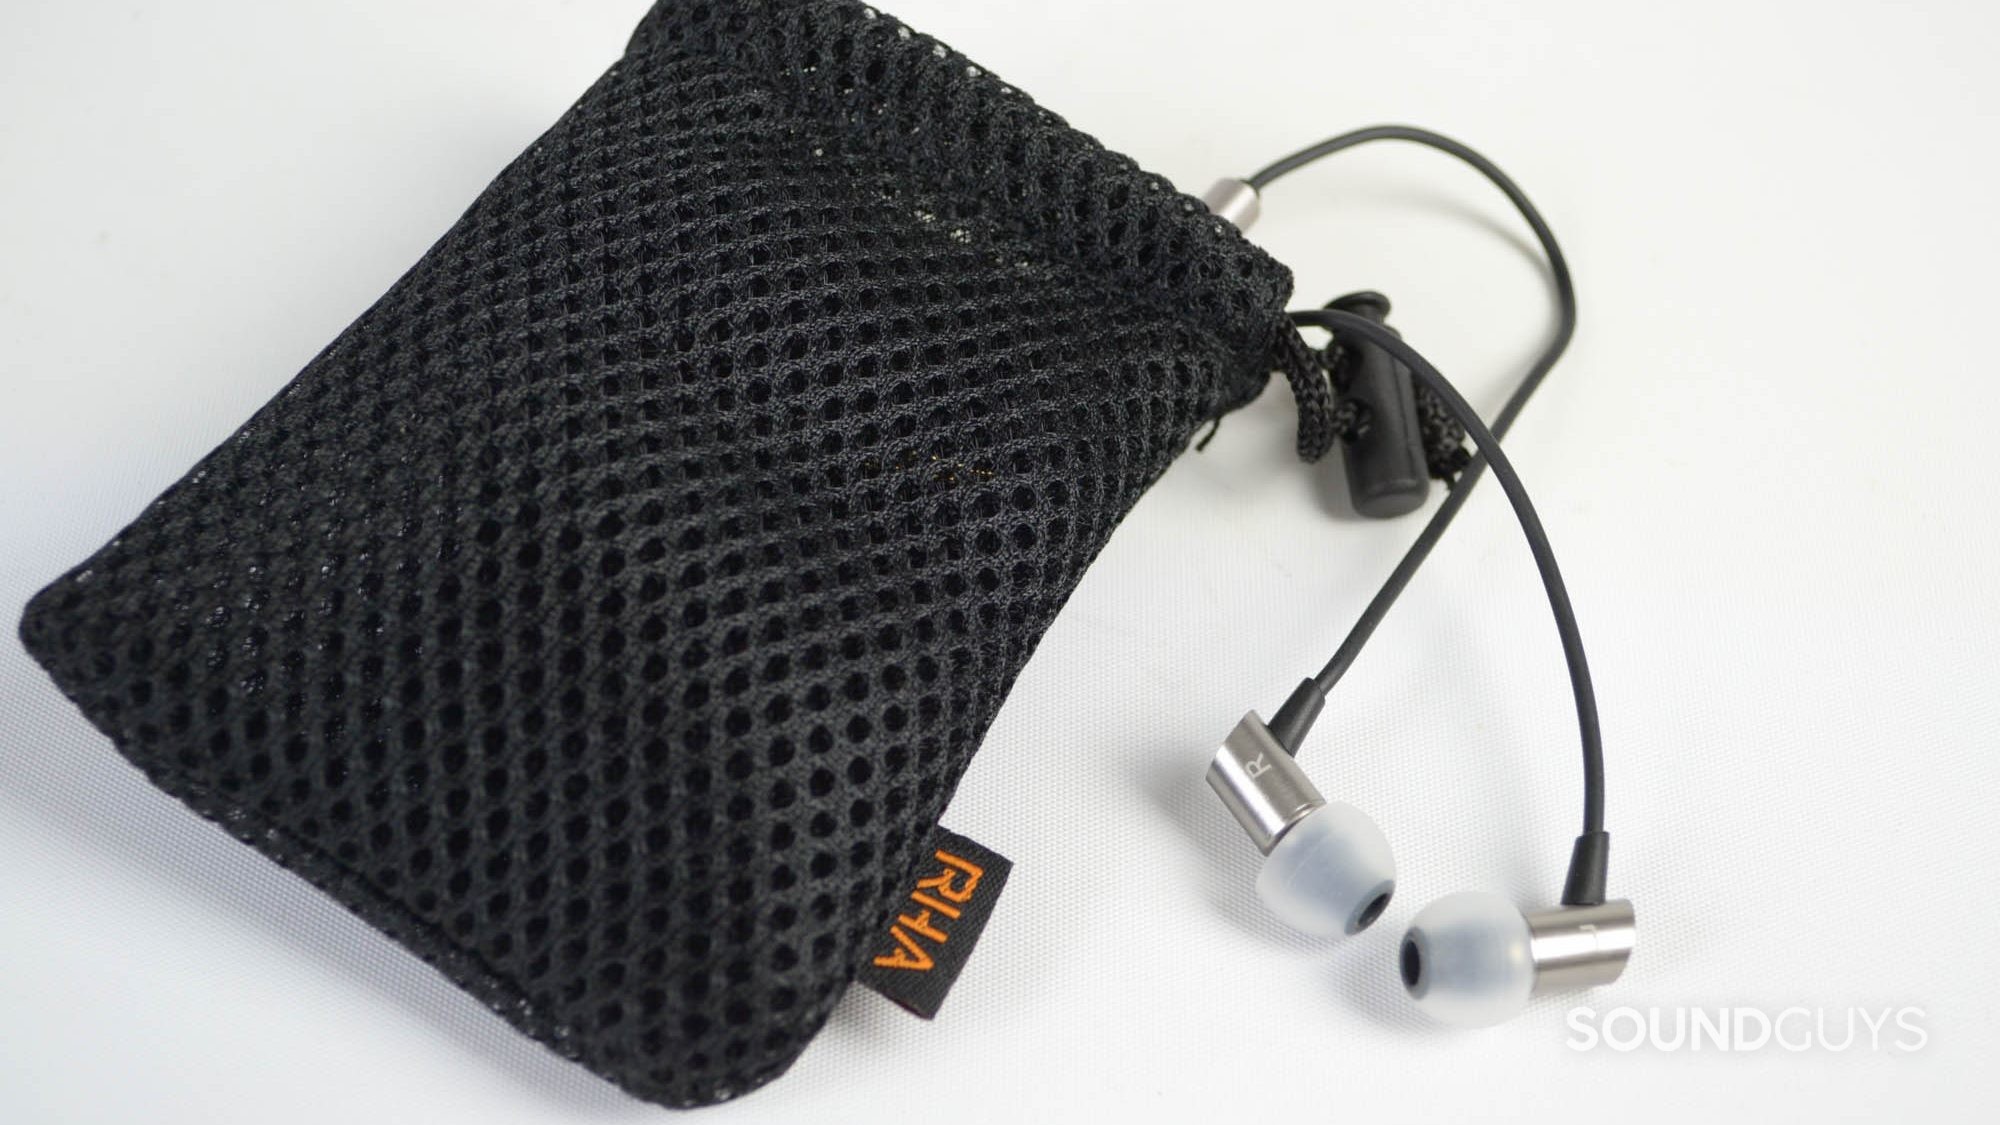 The RHA S500i in a mesh carrying pouch.